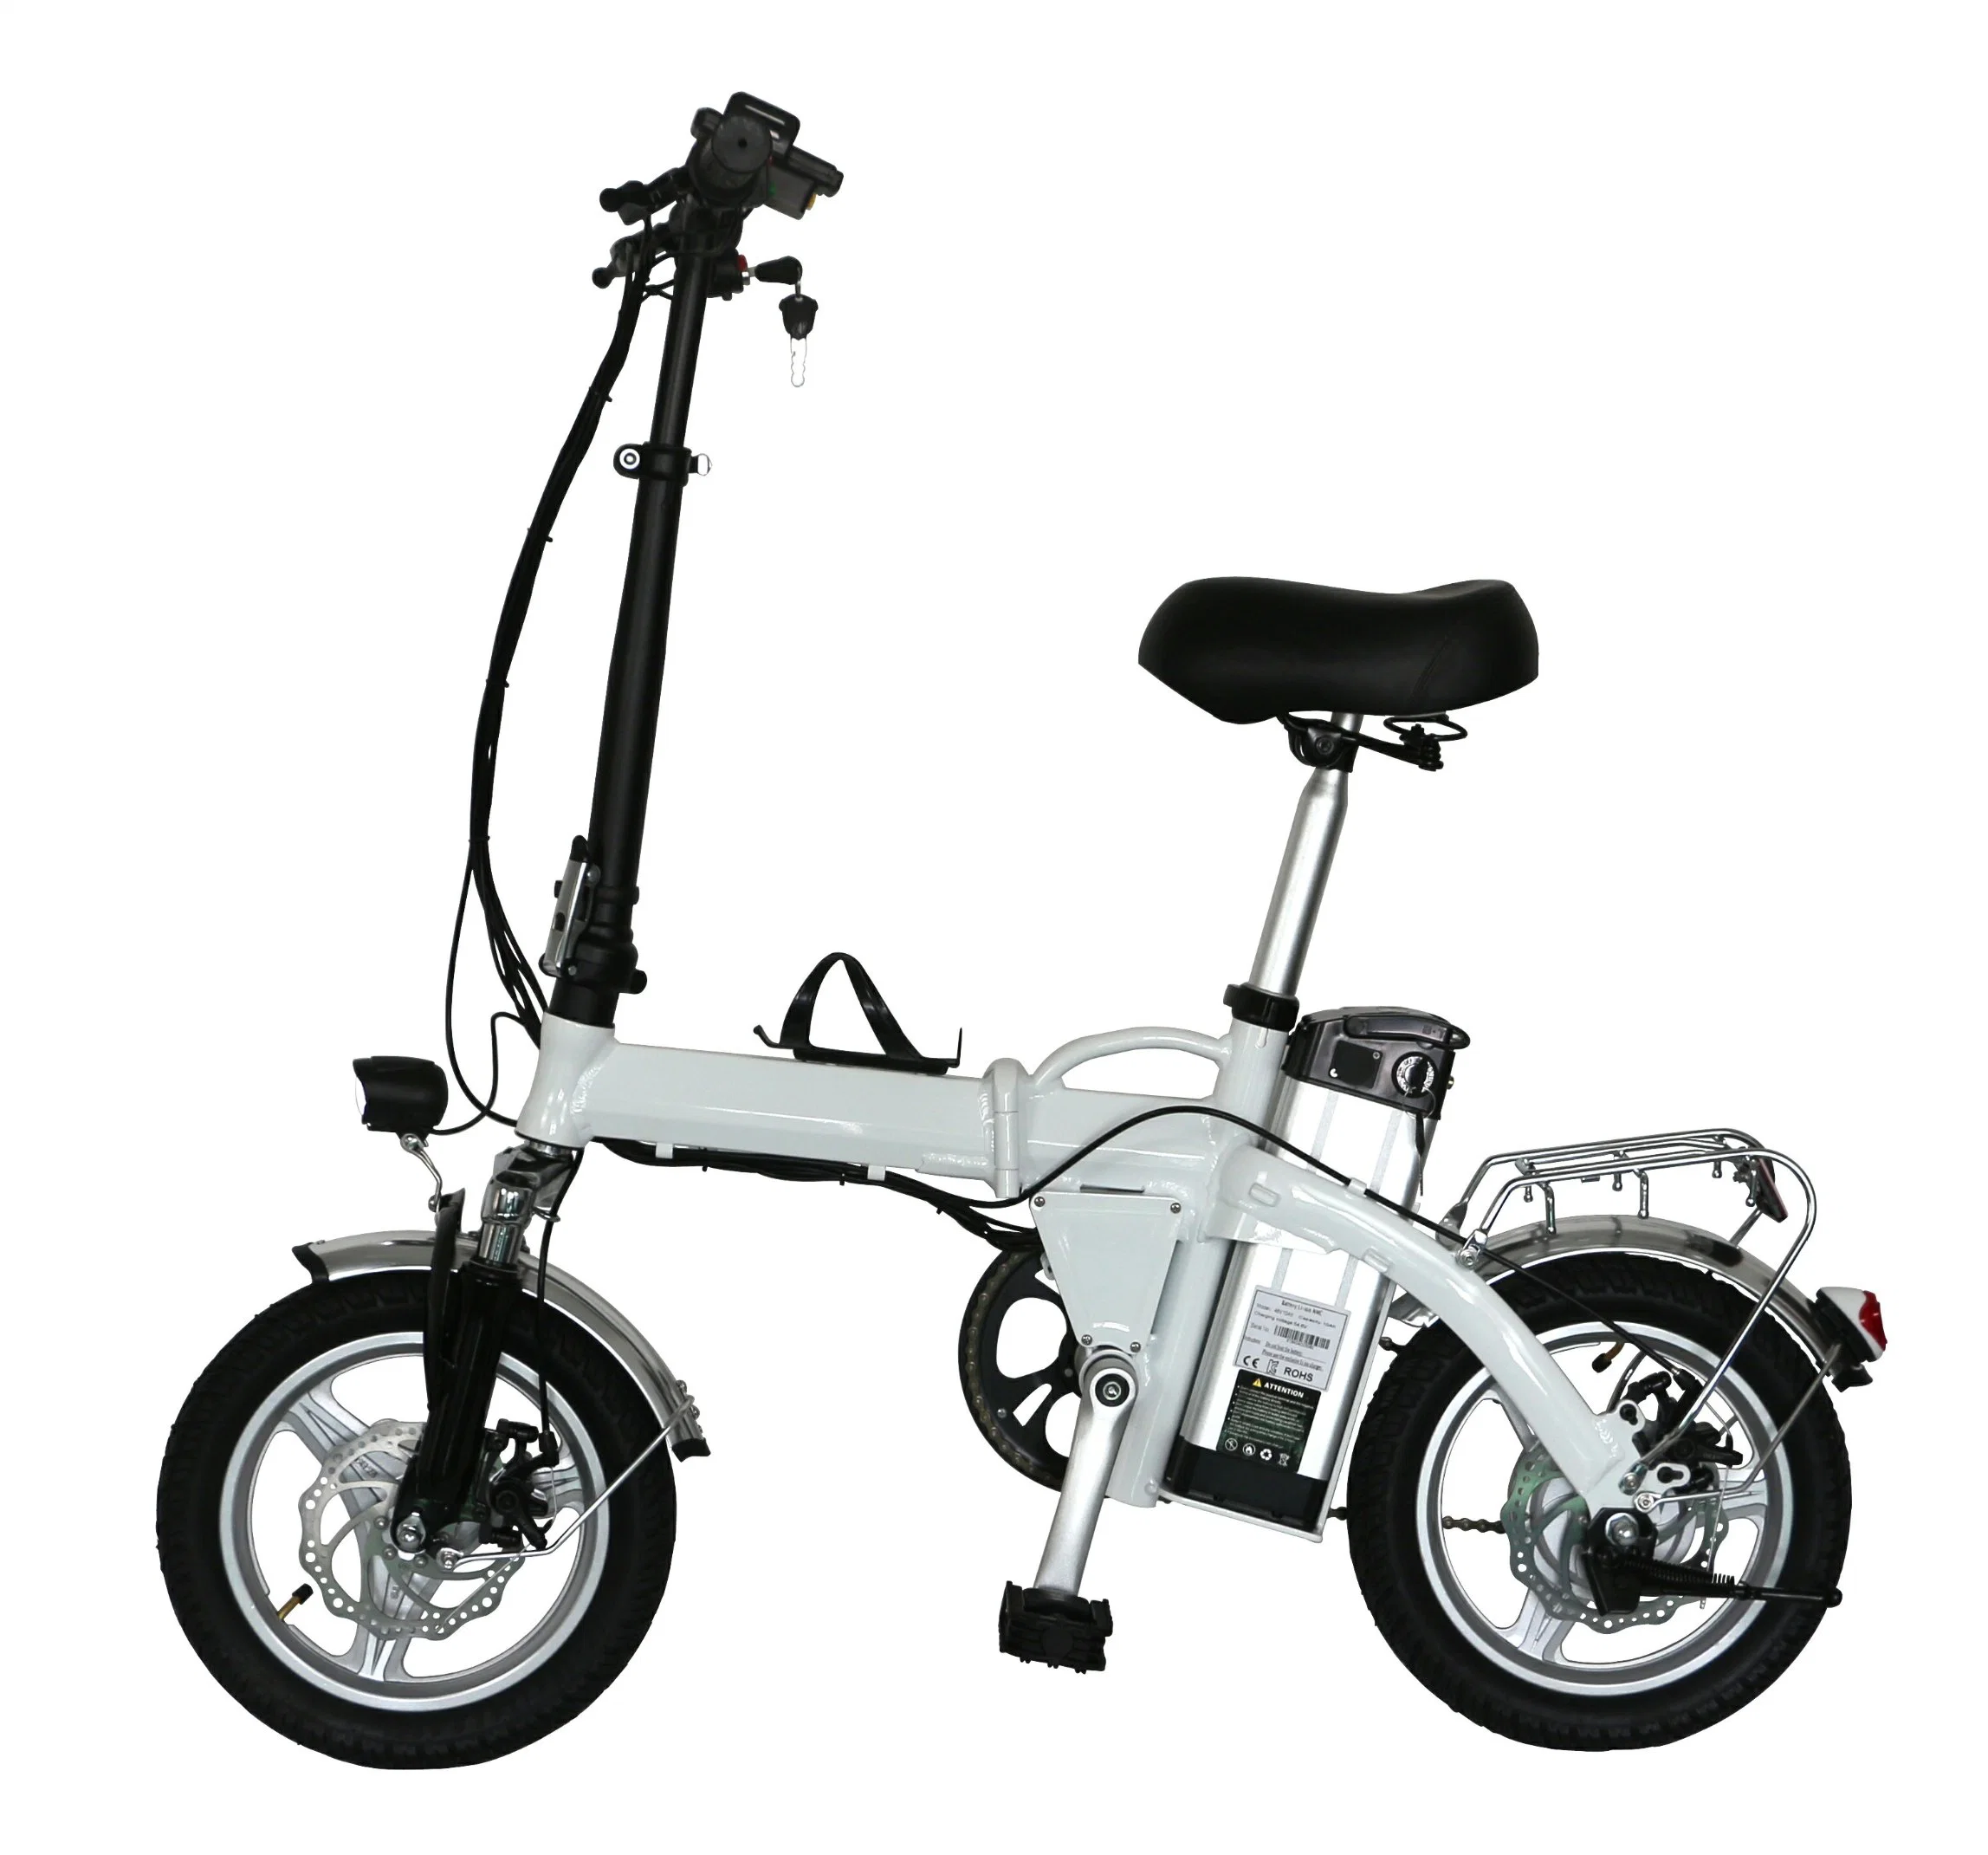 CE Light Electric Bike Folding China Factory Price Bicycle Carbon Fiber Exclusive Model